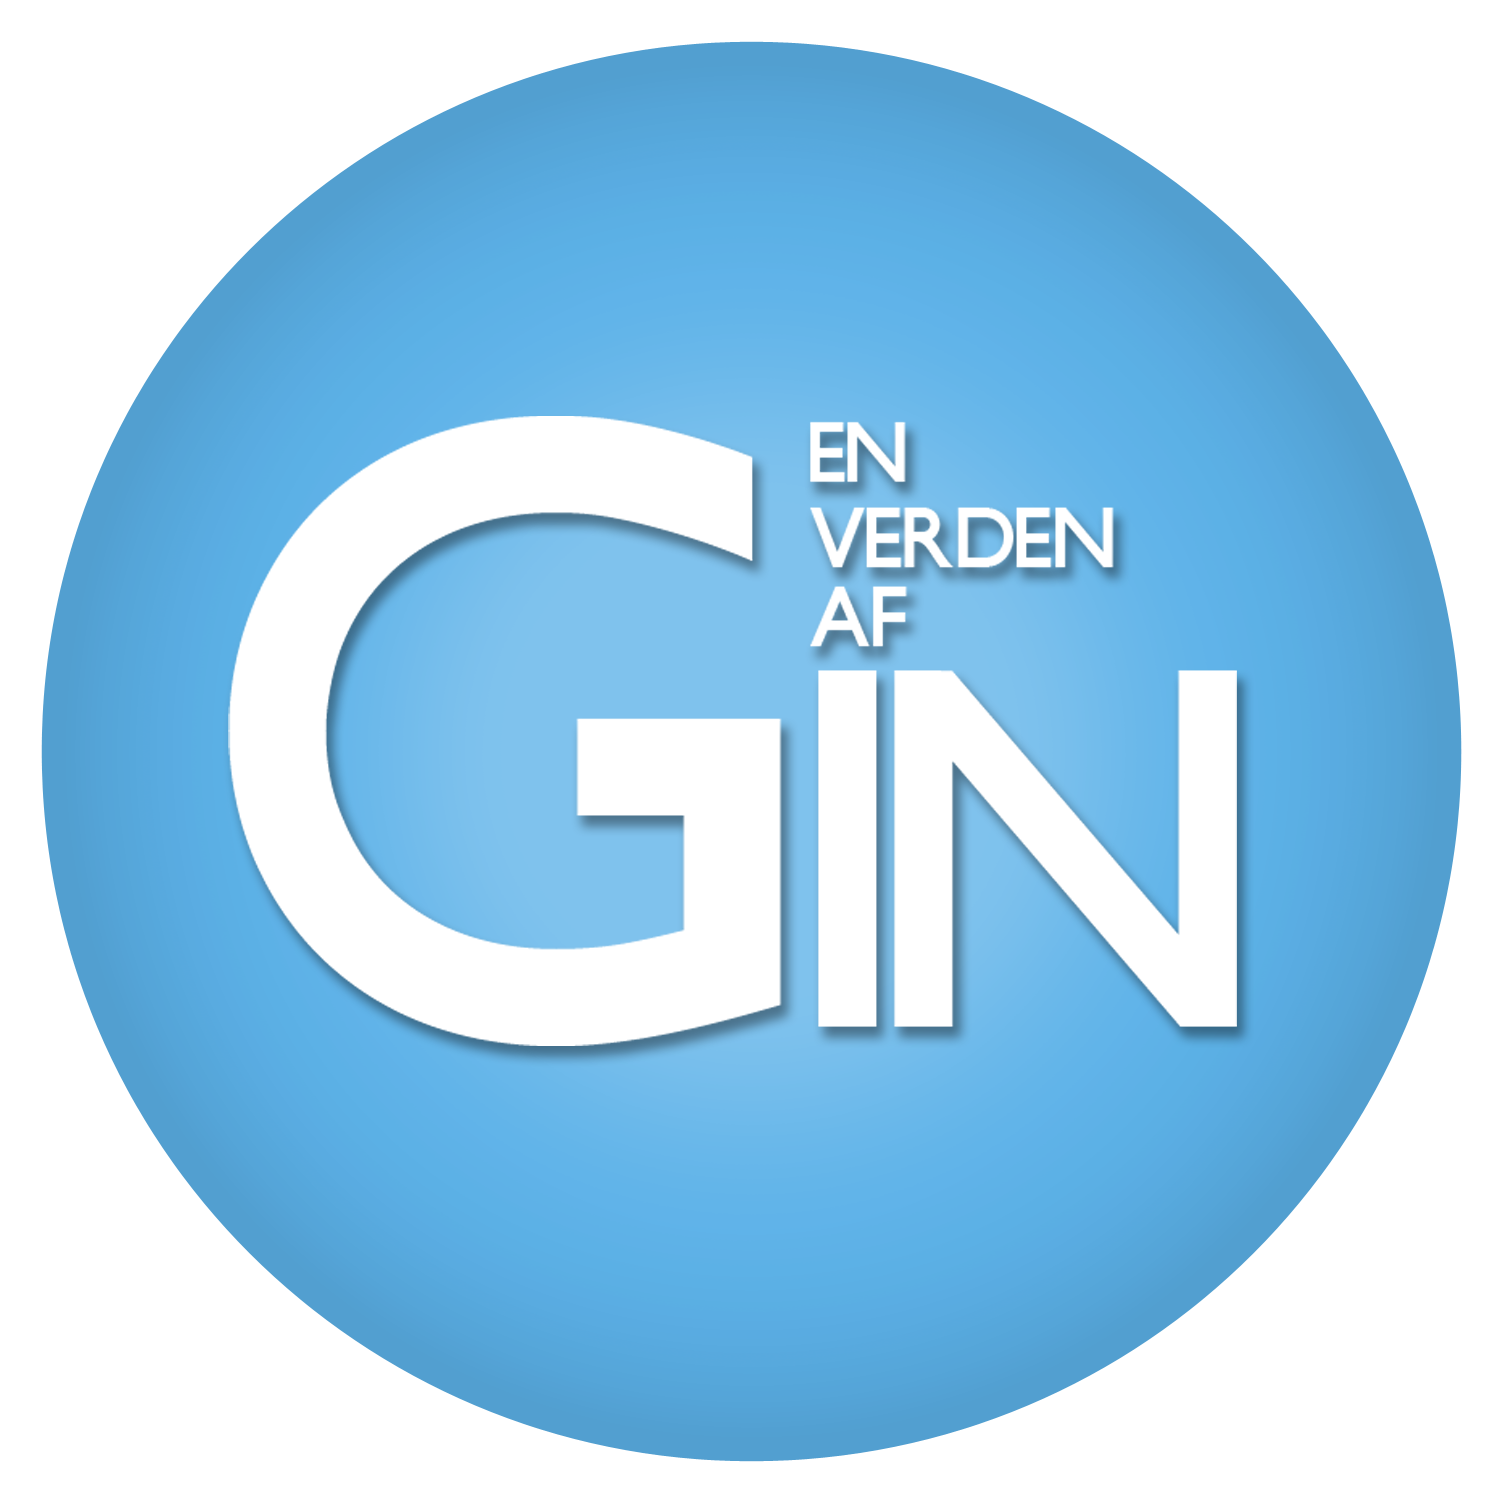 Dedicated to a life of gin. Doing tastings, reviews, articles and presentations about gin in Copenhagen and the rest of Denmark. Managed by @MichaelSperling